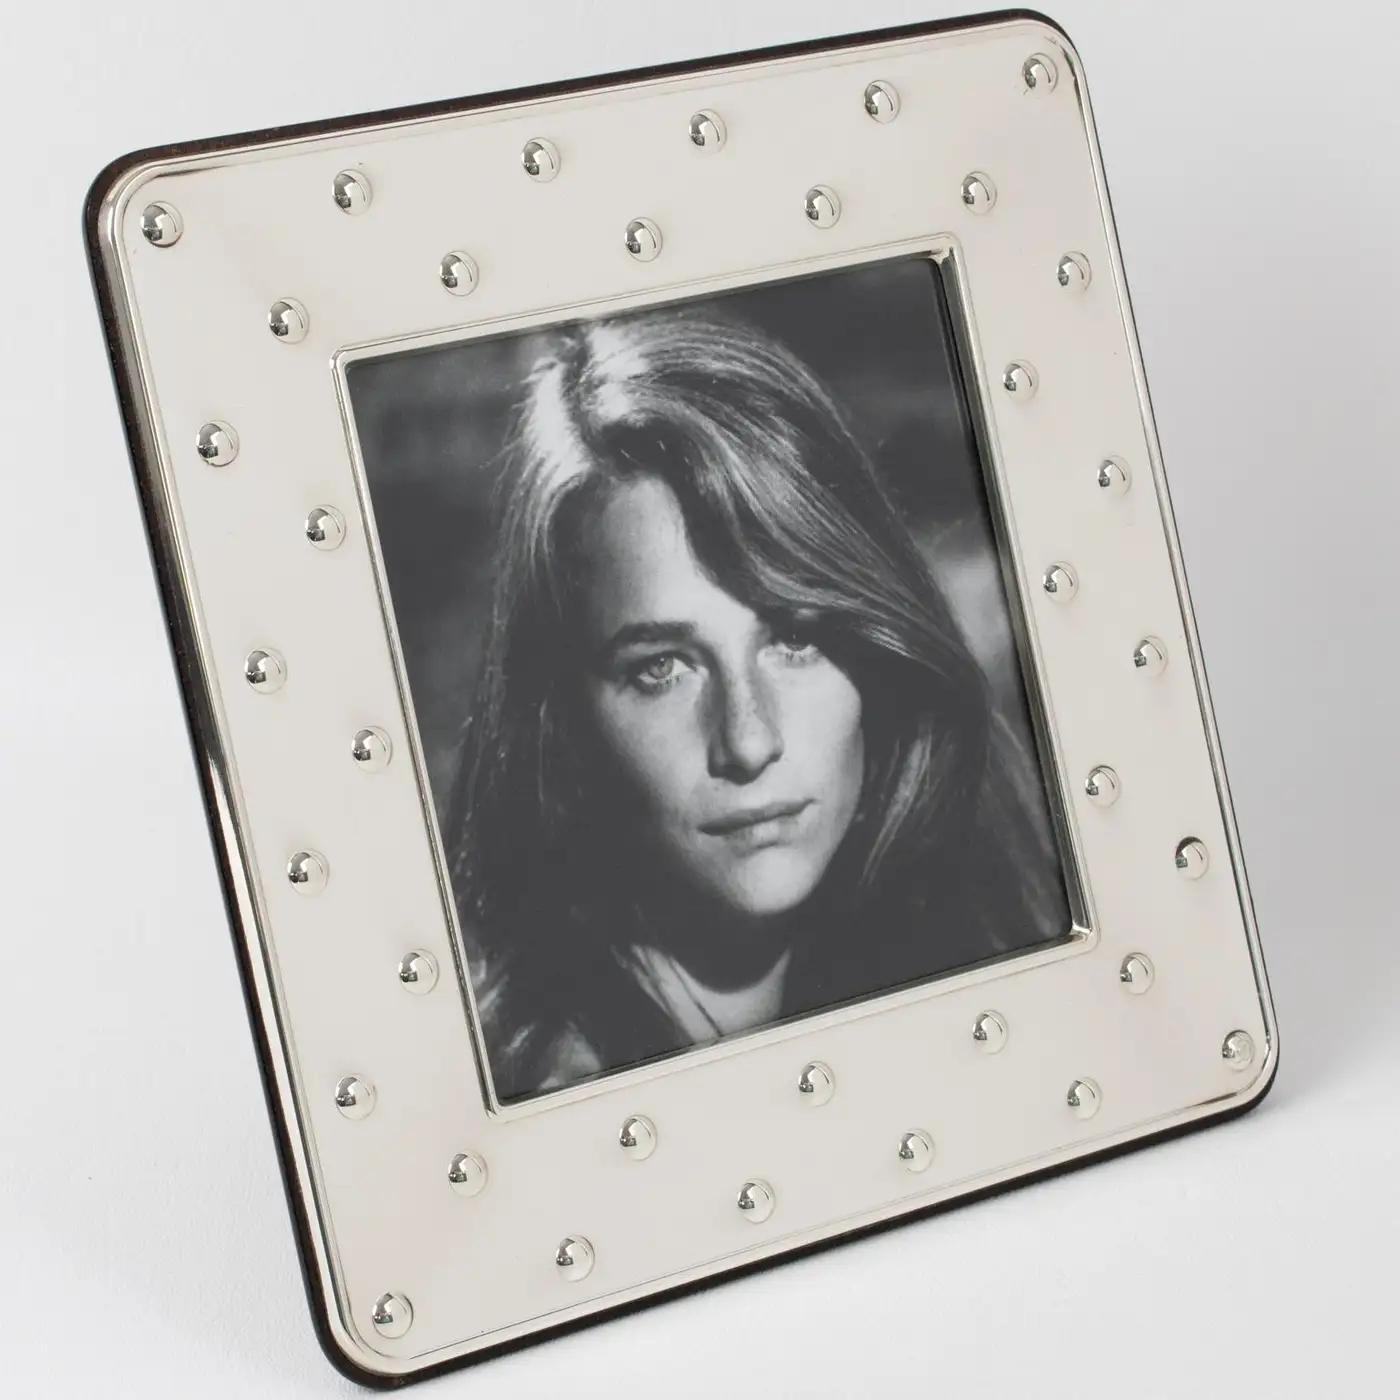 This lovely Christian Dior Paris sterling silver picture photo frame features a square shape with a geometric raised dots pattern. The back and easel are made in high gloss tropical wood. The piece is engraved on the edge with the 